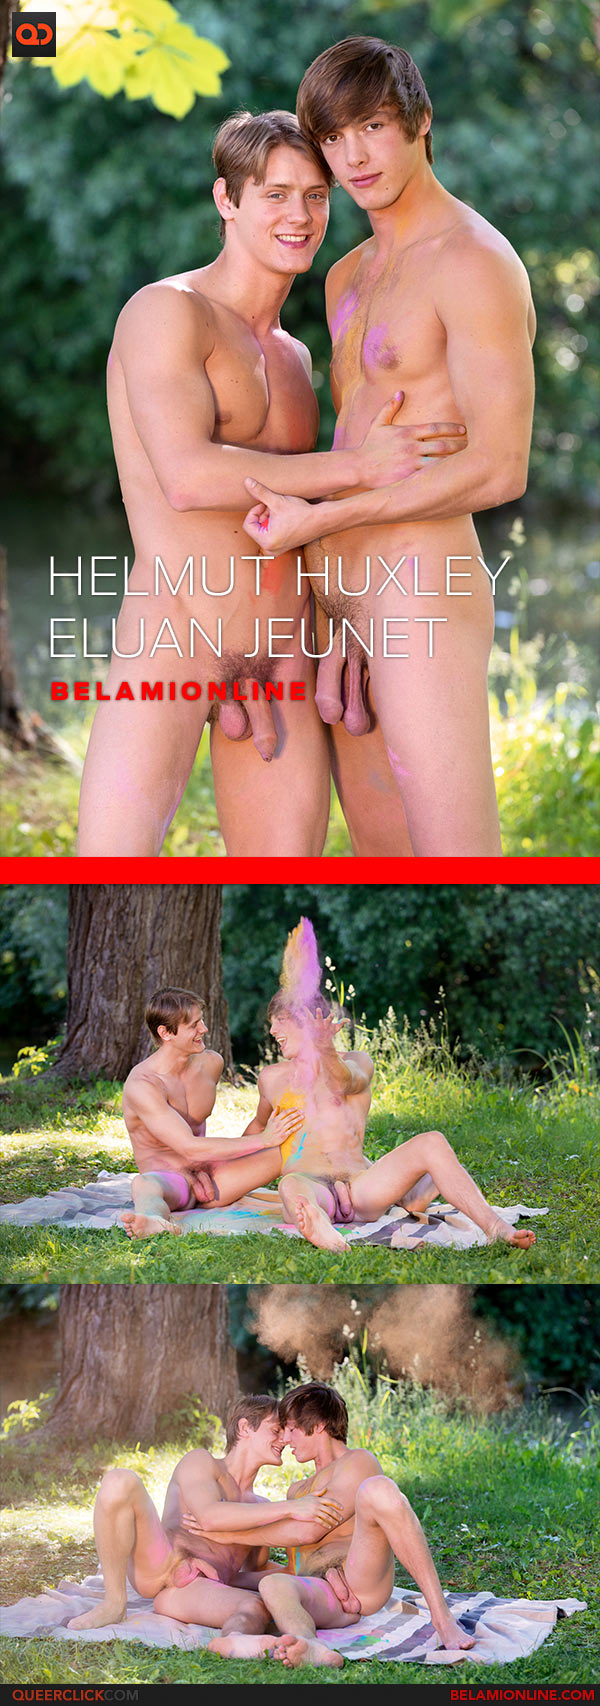 Experience the ultimate in adult pleasure with Helmut Huxley's gallery